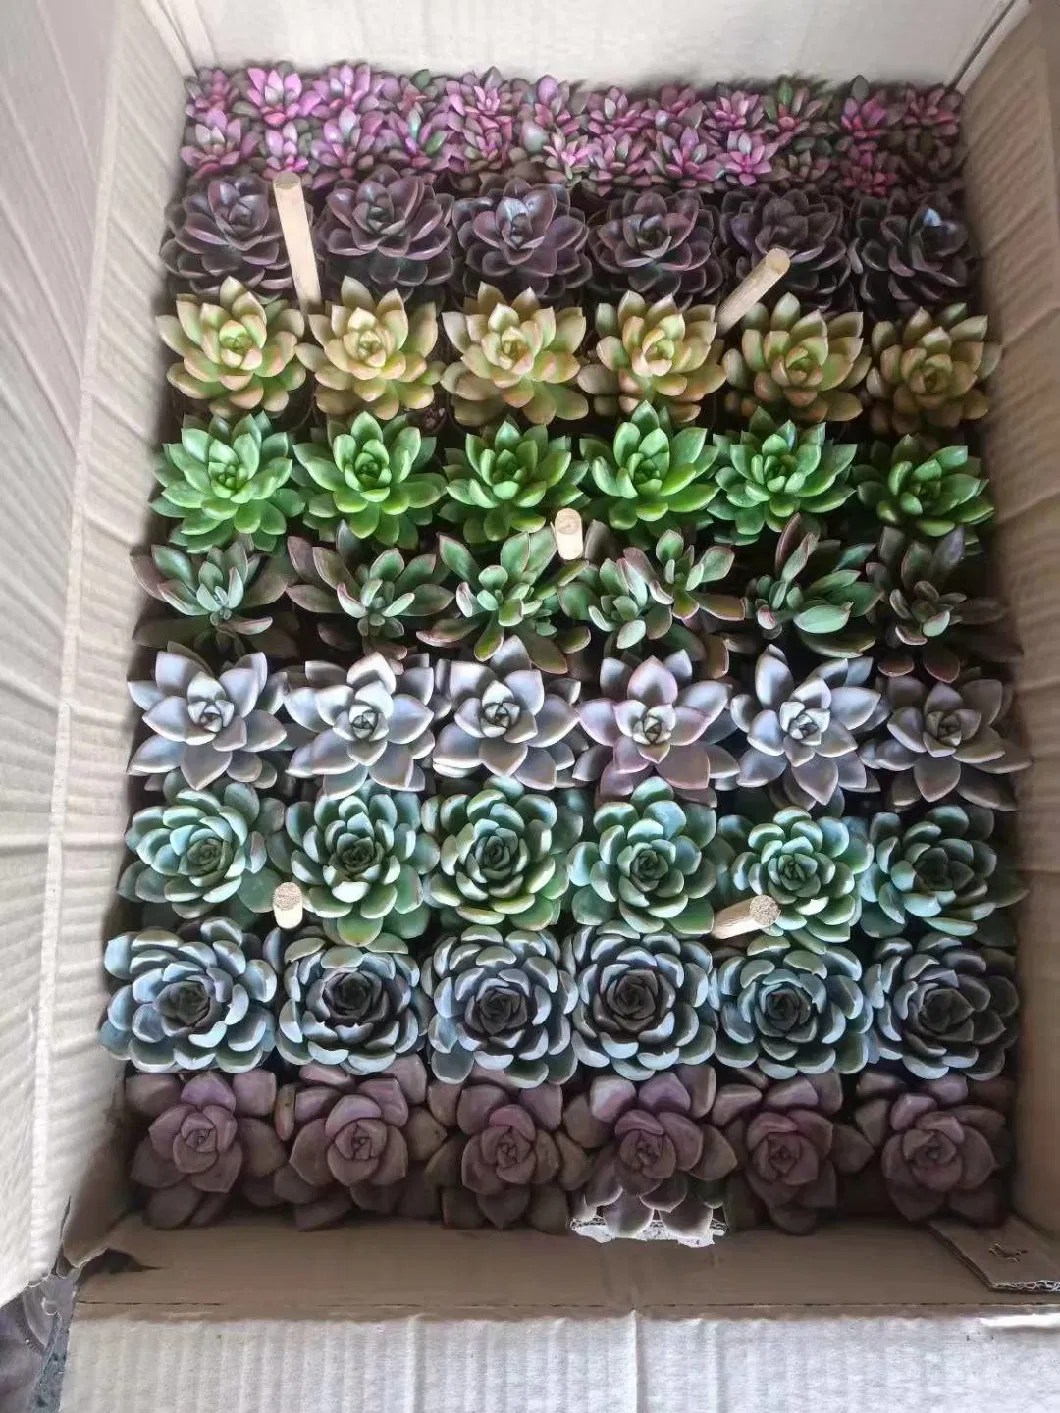 Cheap Price Succulent Live Plant Wholesale Indoor and Outdoor Decoration